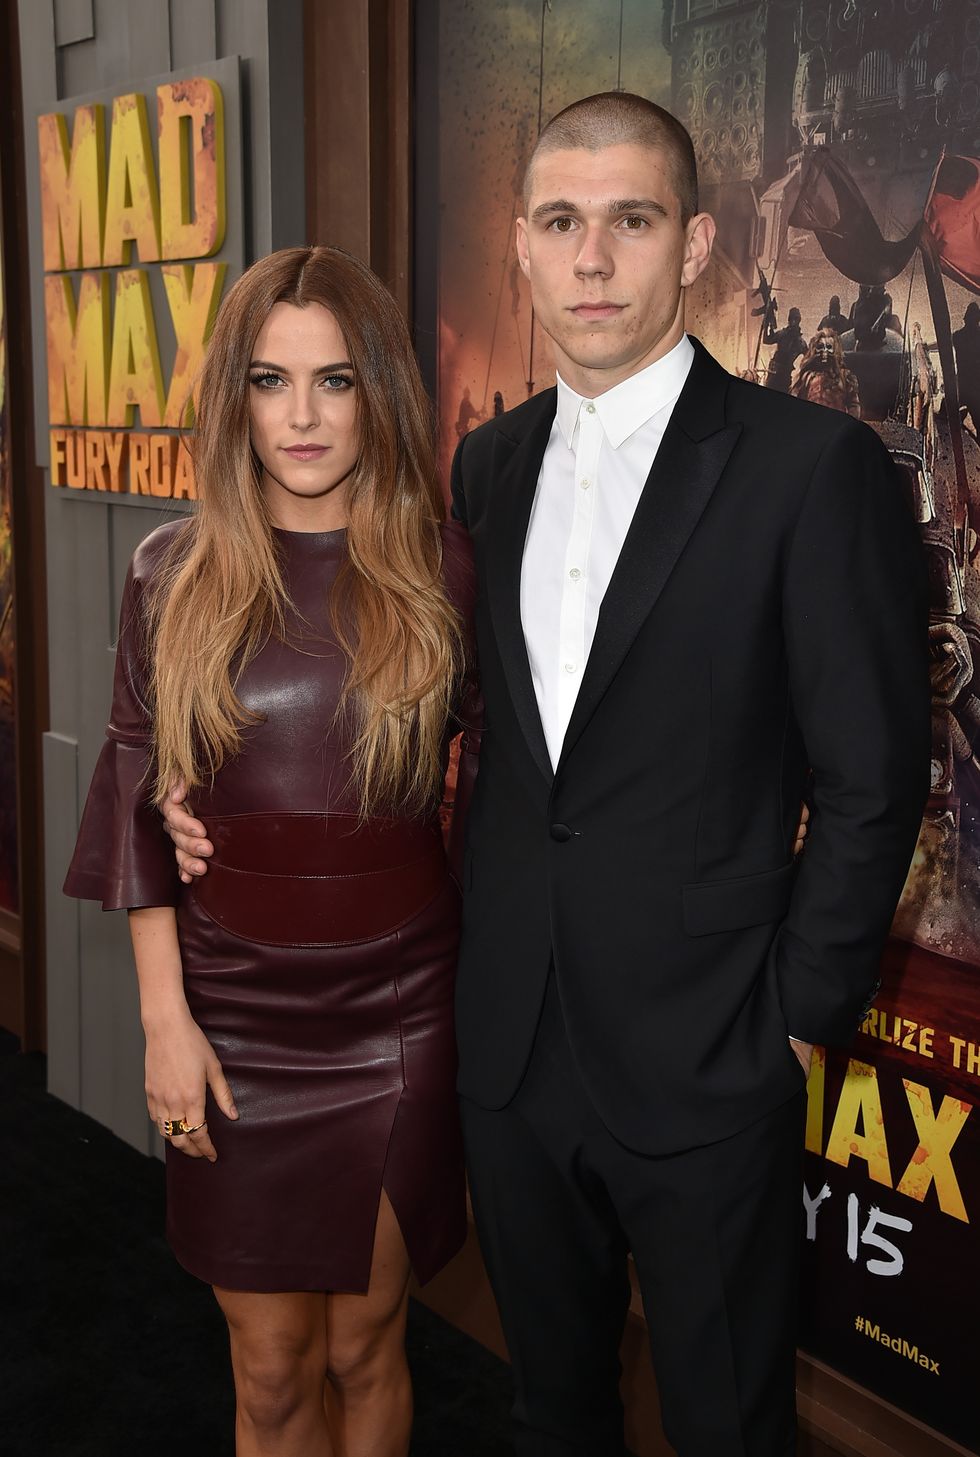 premiere of warner bros pictures' "mad max fury road" red carpet